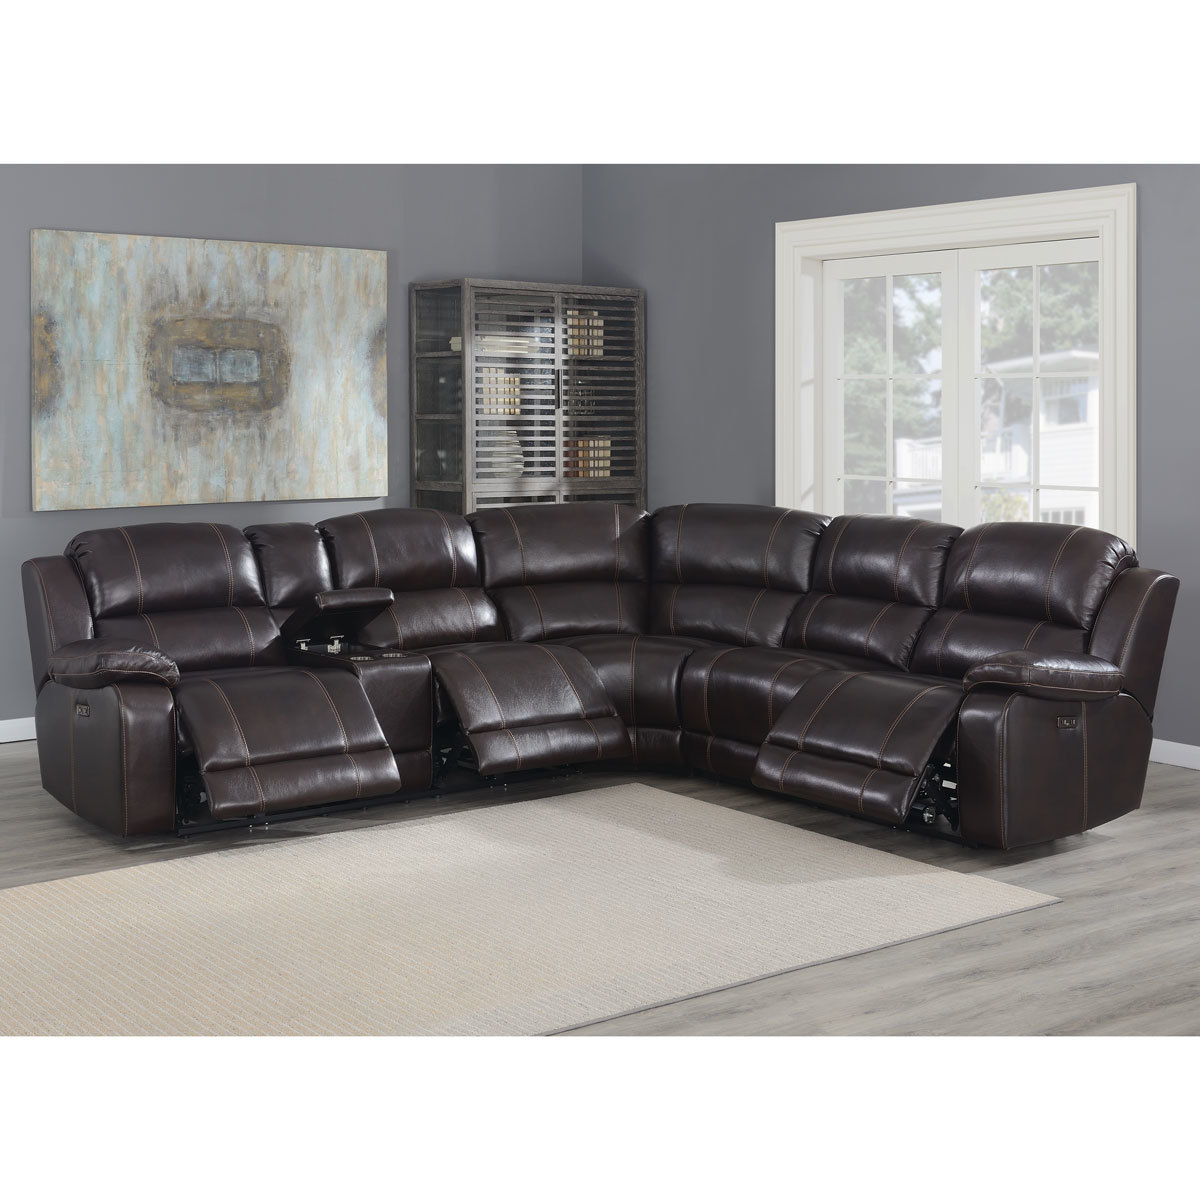 Pulaski Dunhill Brown Leather Power Reclining Sectional